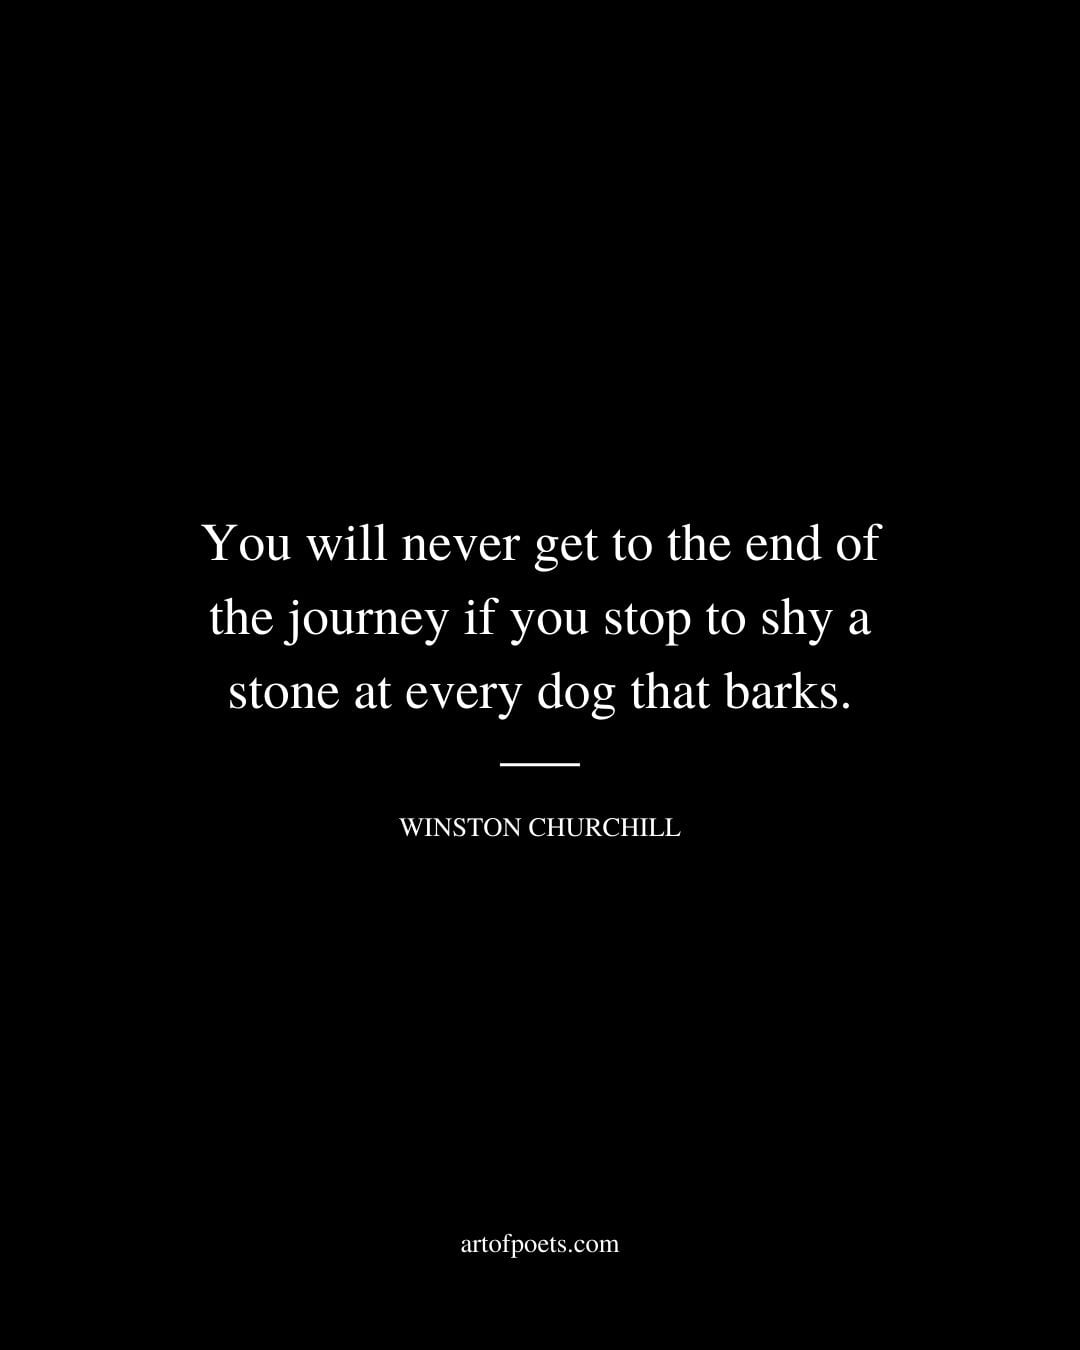 You will never get to the end of the journey if you stop to shy a stone at every dog that barks